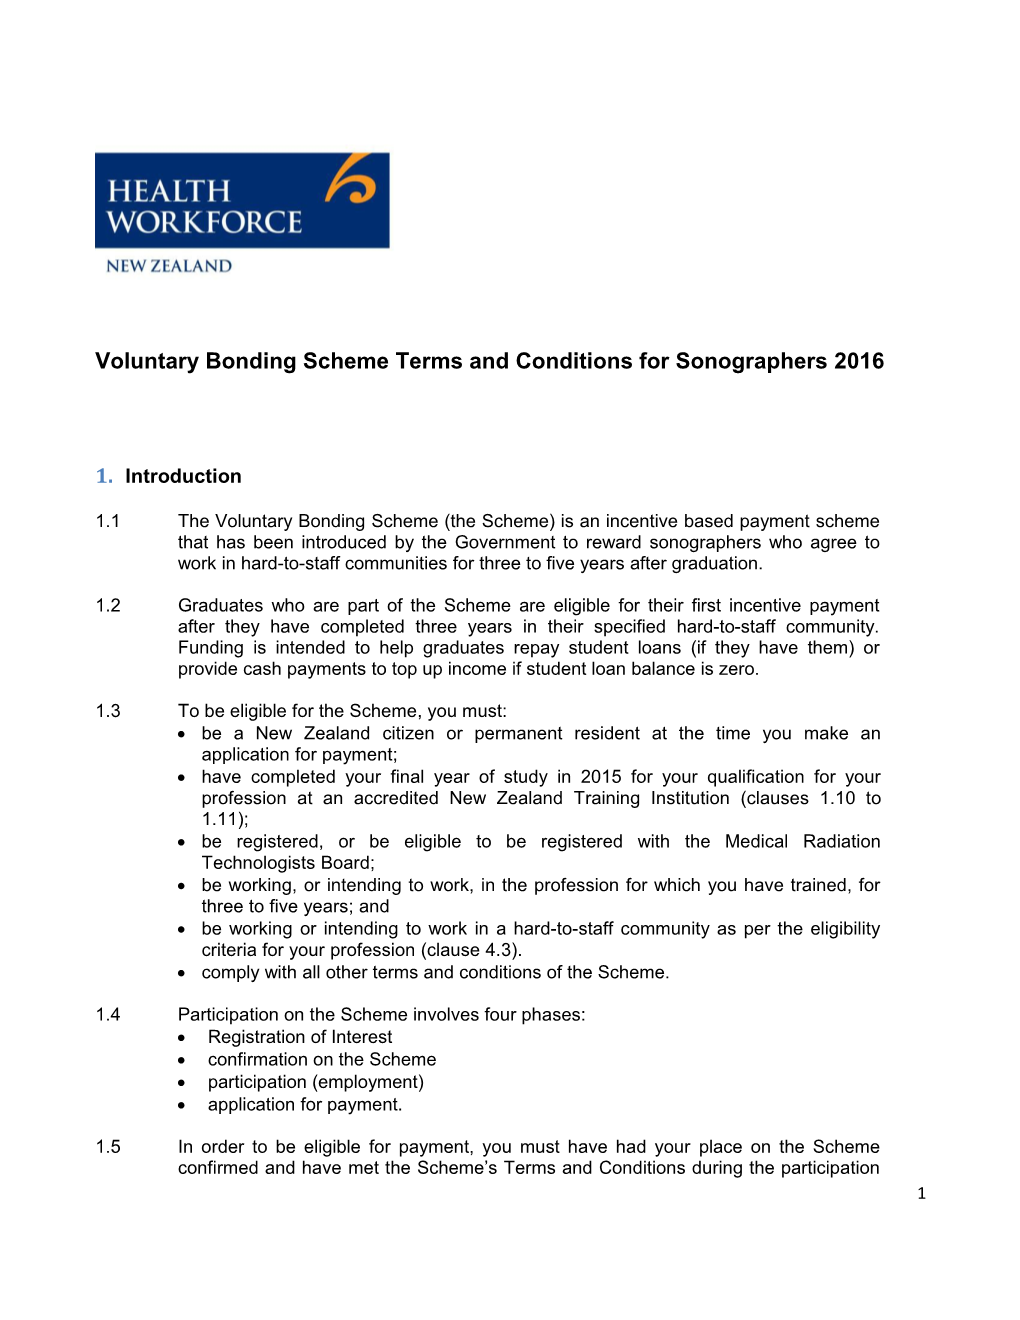 Voluntary Bonding Scheme Terms and Conditions for Sonographers 2016